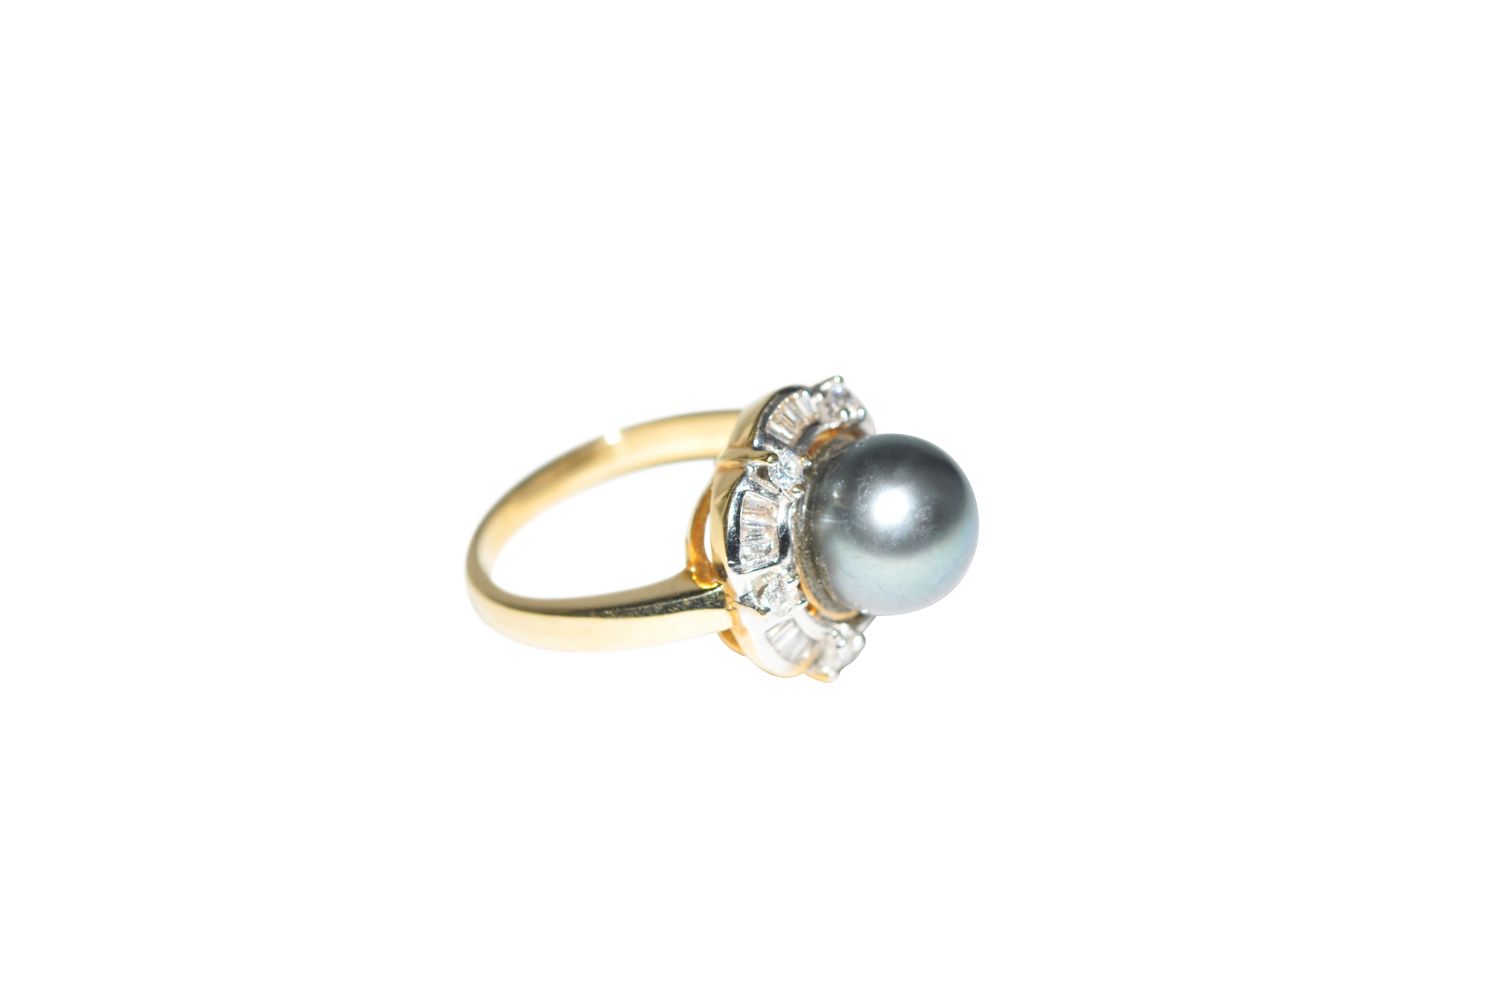 Brilliant ring with South Sea pearl18Kt gold ring with diamonds total carat weight approx. 0.7ct and - Image 3 of 3